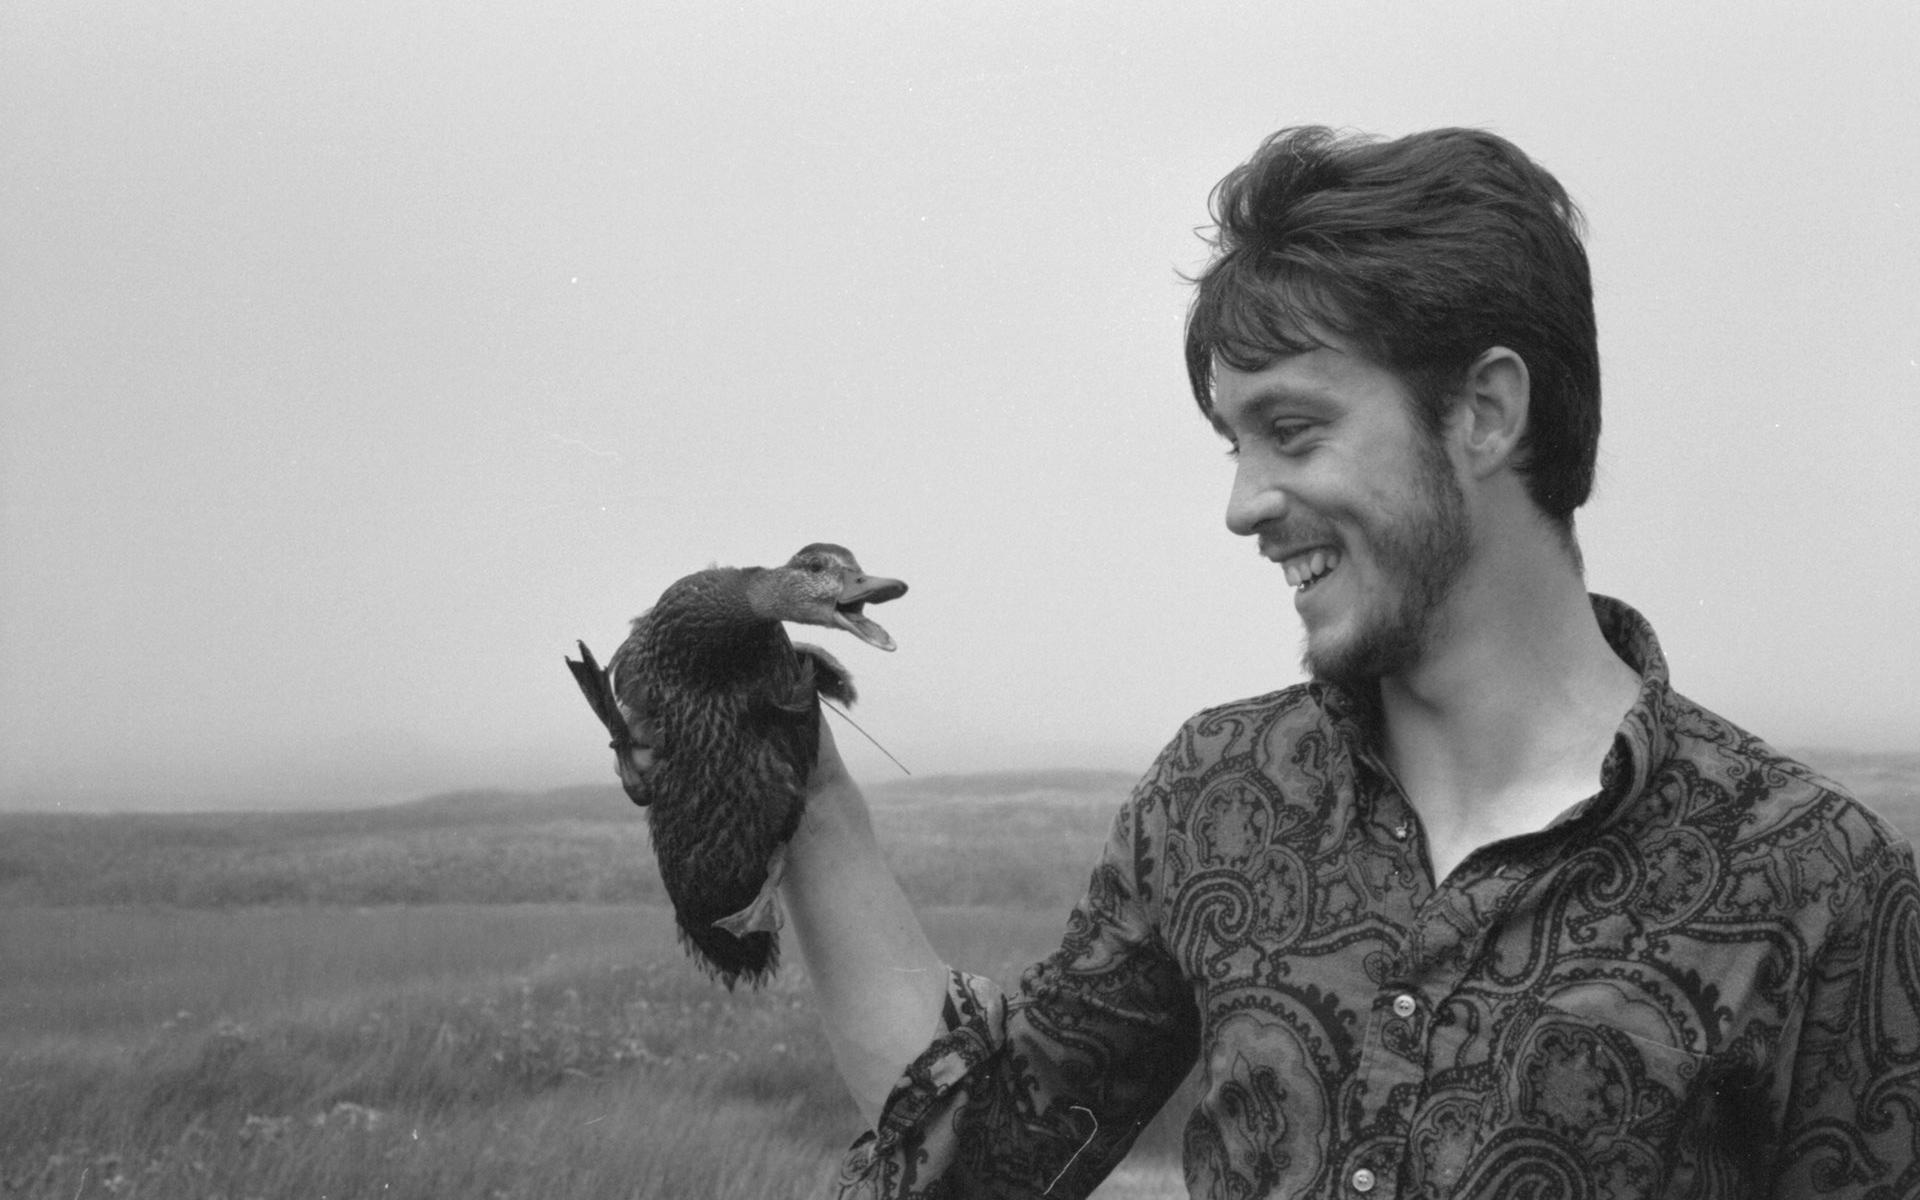 Pierre Norris of the meteorological station placing wild duckling back on nest